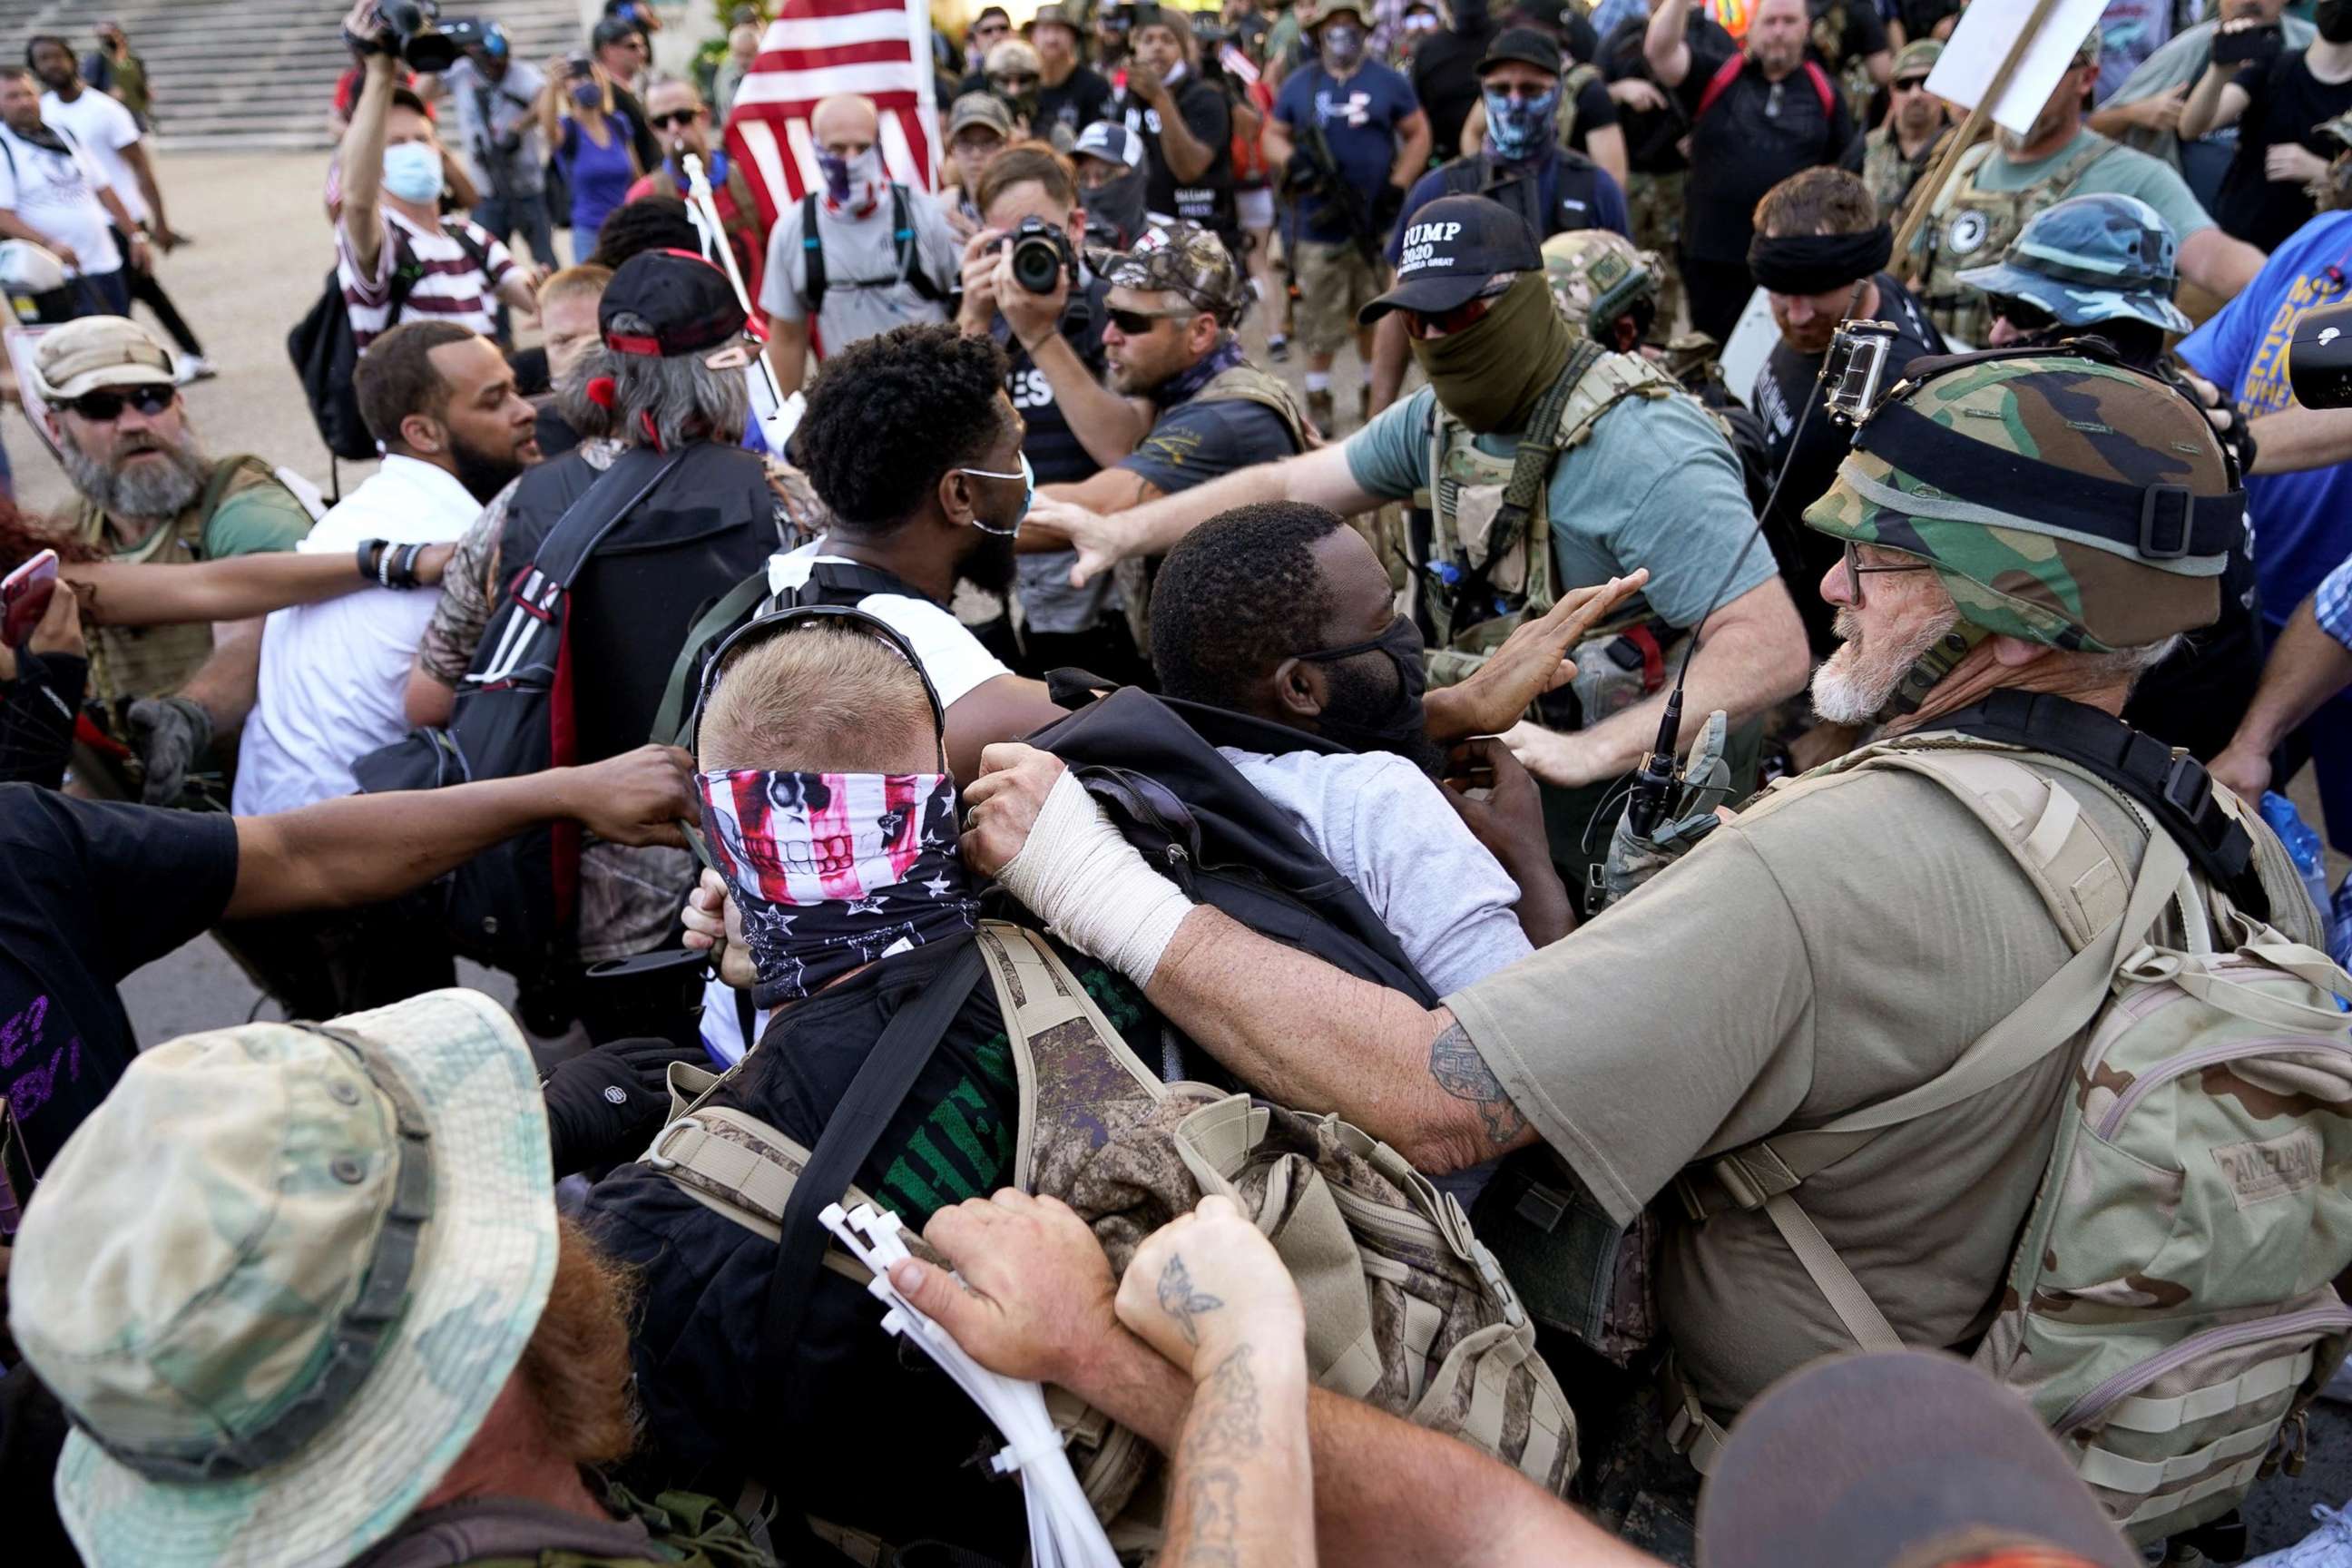 PHOTO: Far-right activists and self-described militia members and Black Lives Matter activists scuffle on the day of the Kentucky Derby horse race in Louisville, Ky., Sept. 5, 2020.